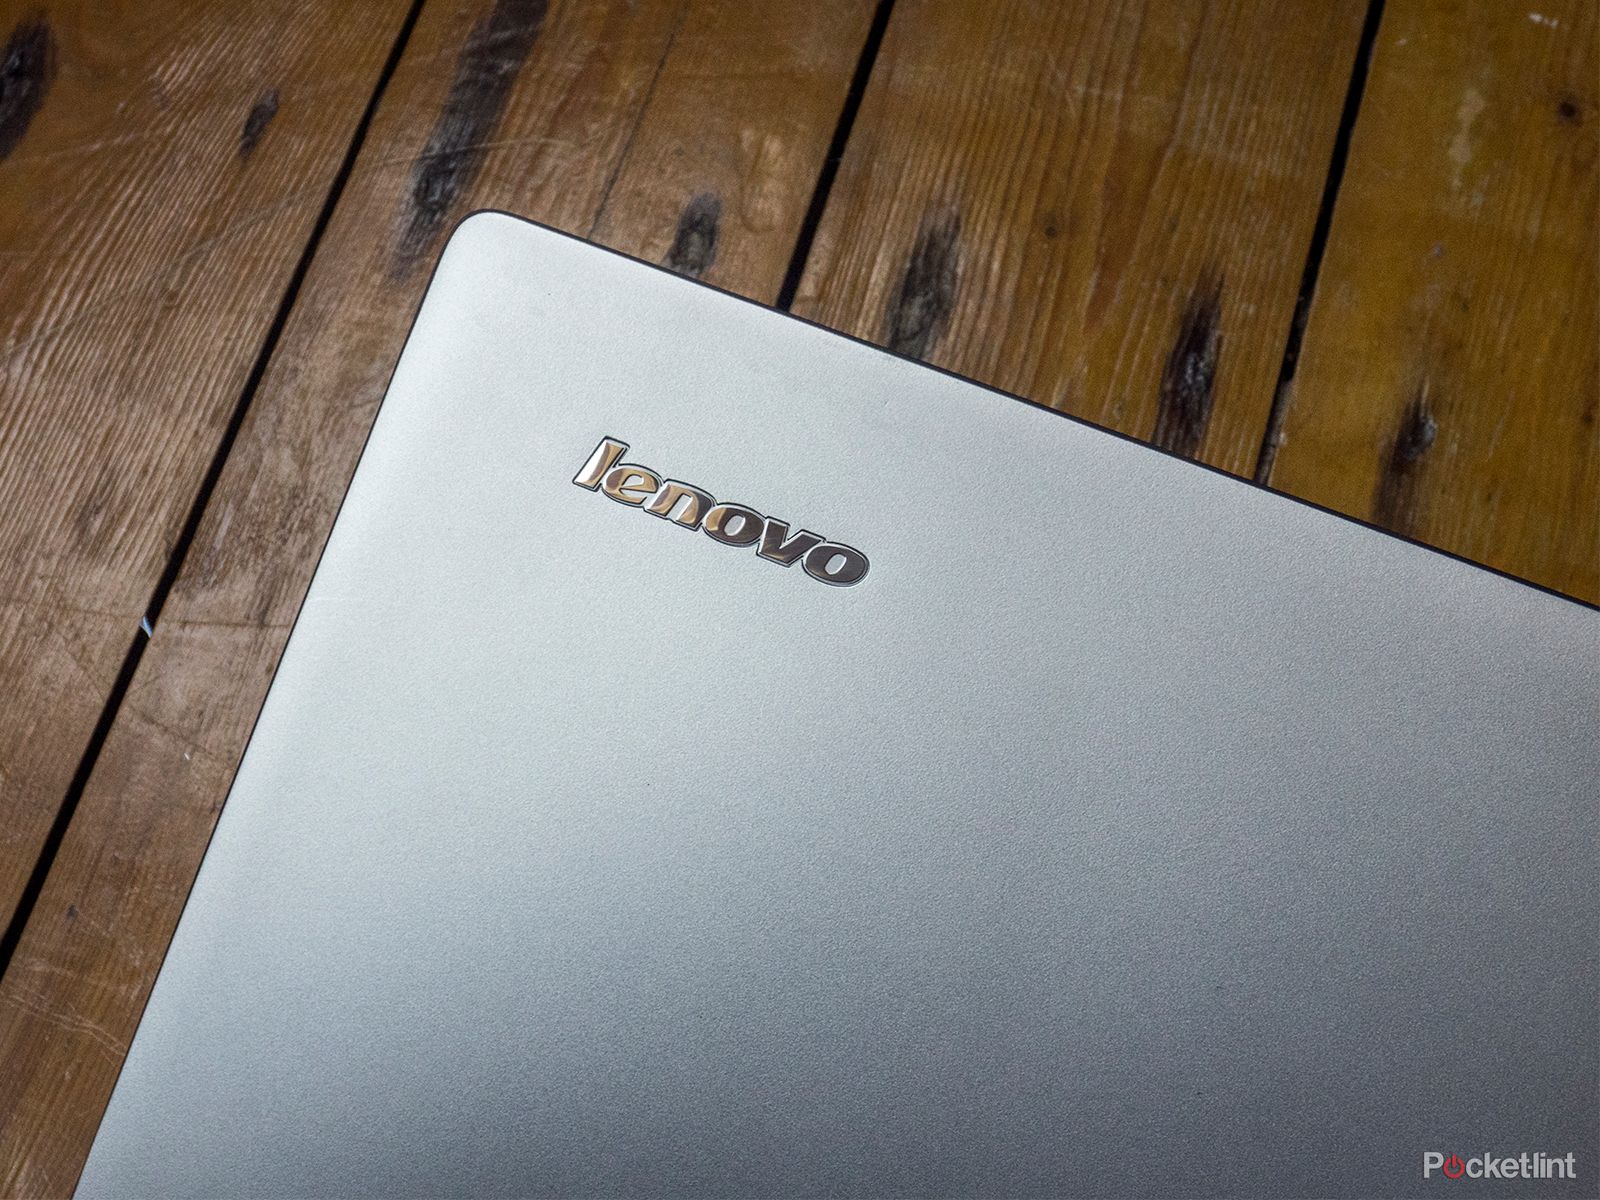 worried about lenovo’s pre installed spyware here’s how to remove superfish from pcs image 1